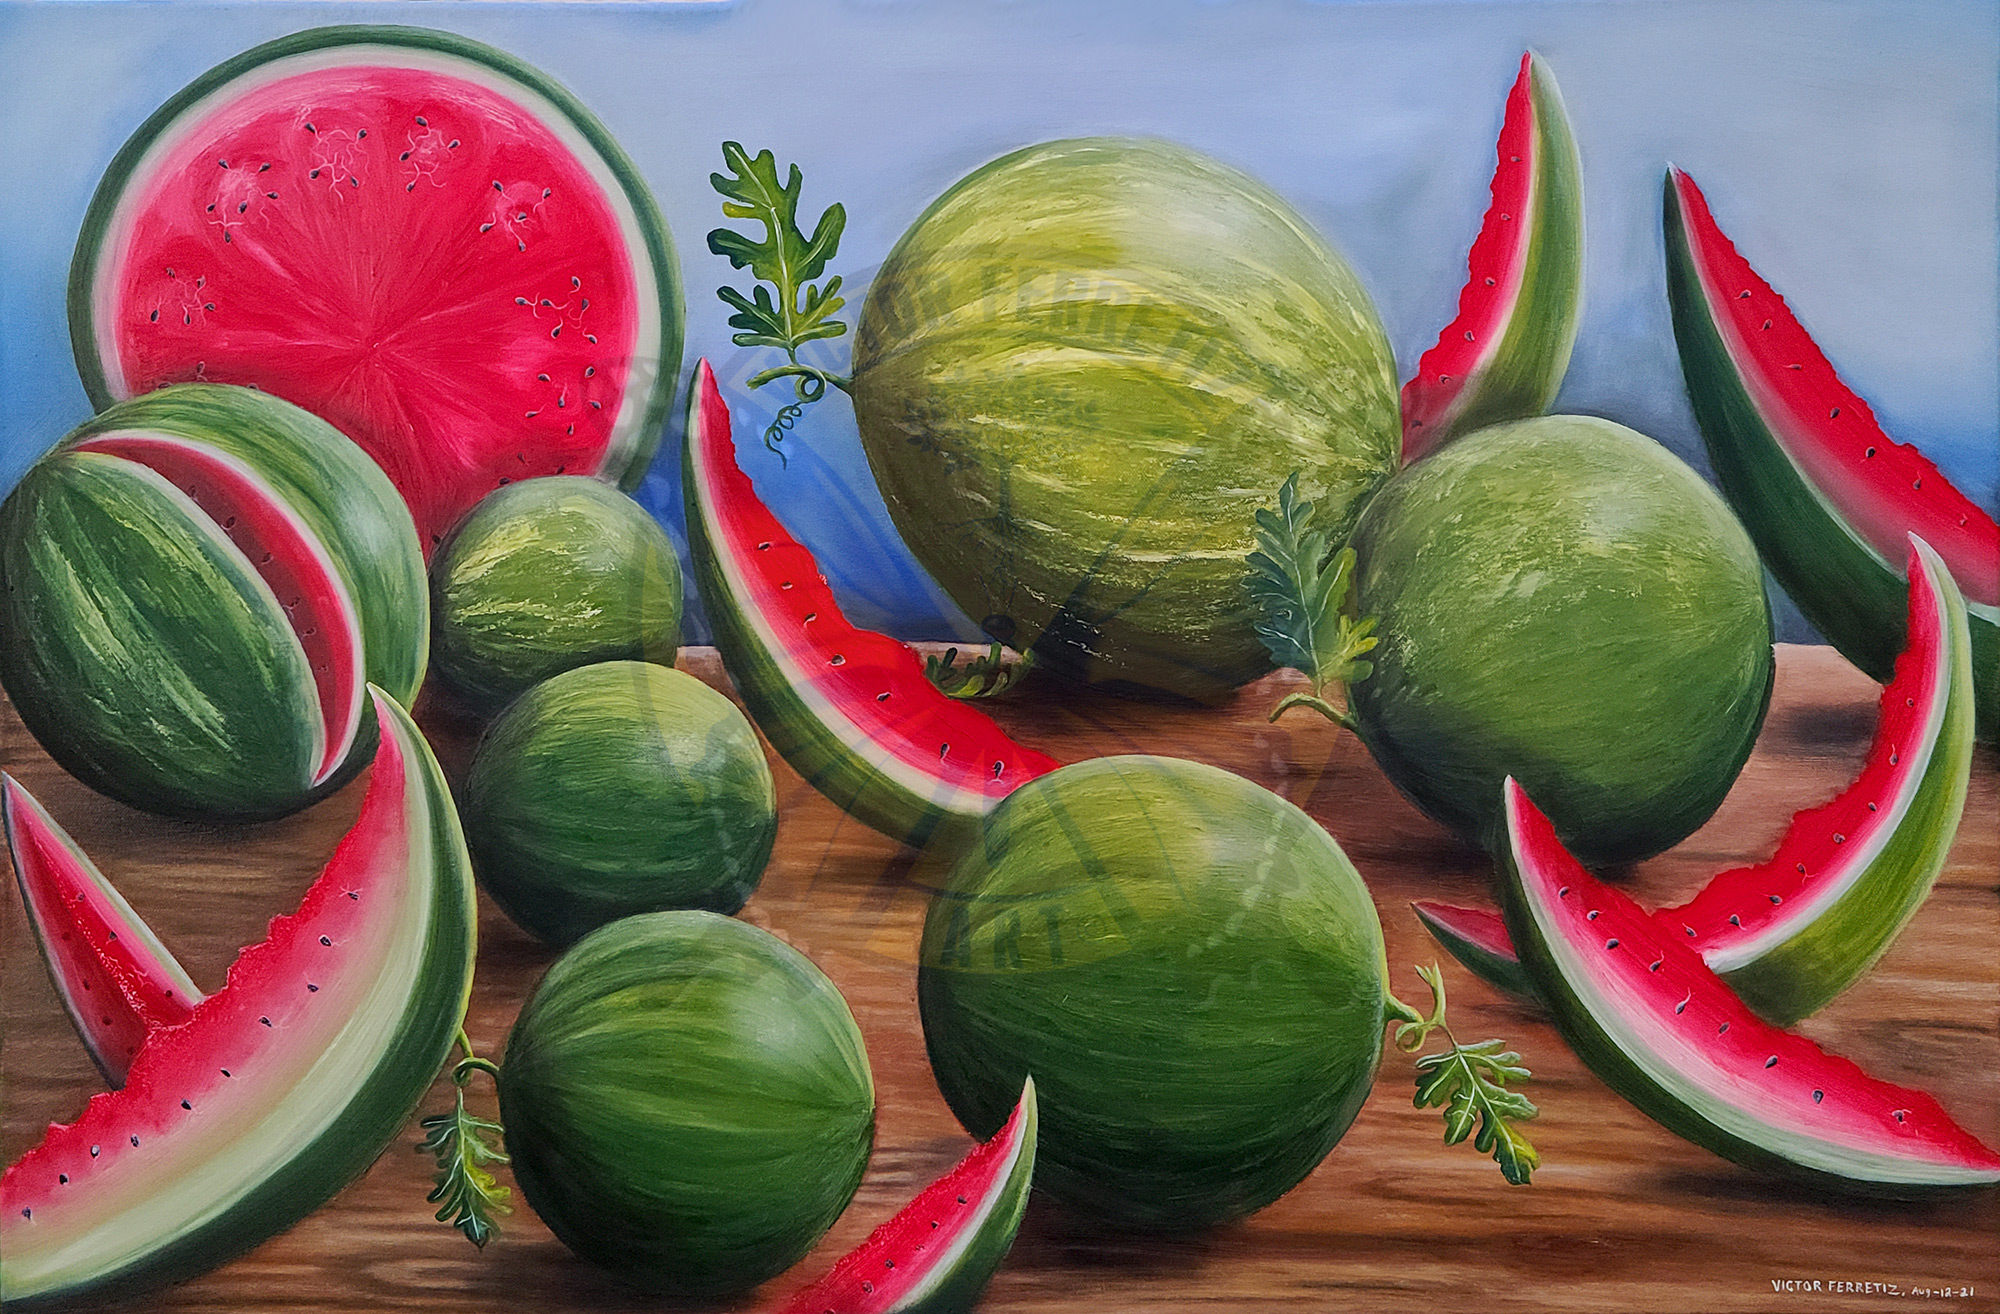 This original work of these delicious watermelons represents the sweetness of life and the passion we give each of our days to achieve our dreams. This work of art was inspired by the work of the Mexican artist Frida Kahlo entitled Viva la Vida. The three-dimensionality of this work gives us a sense that everything that surrounds us also has a little bit of life.